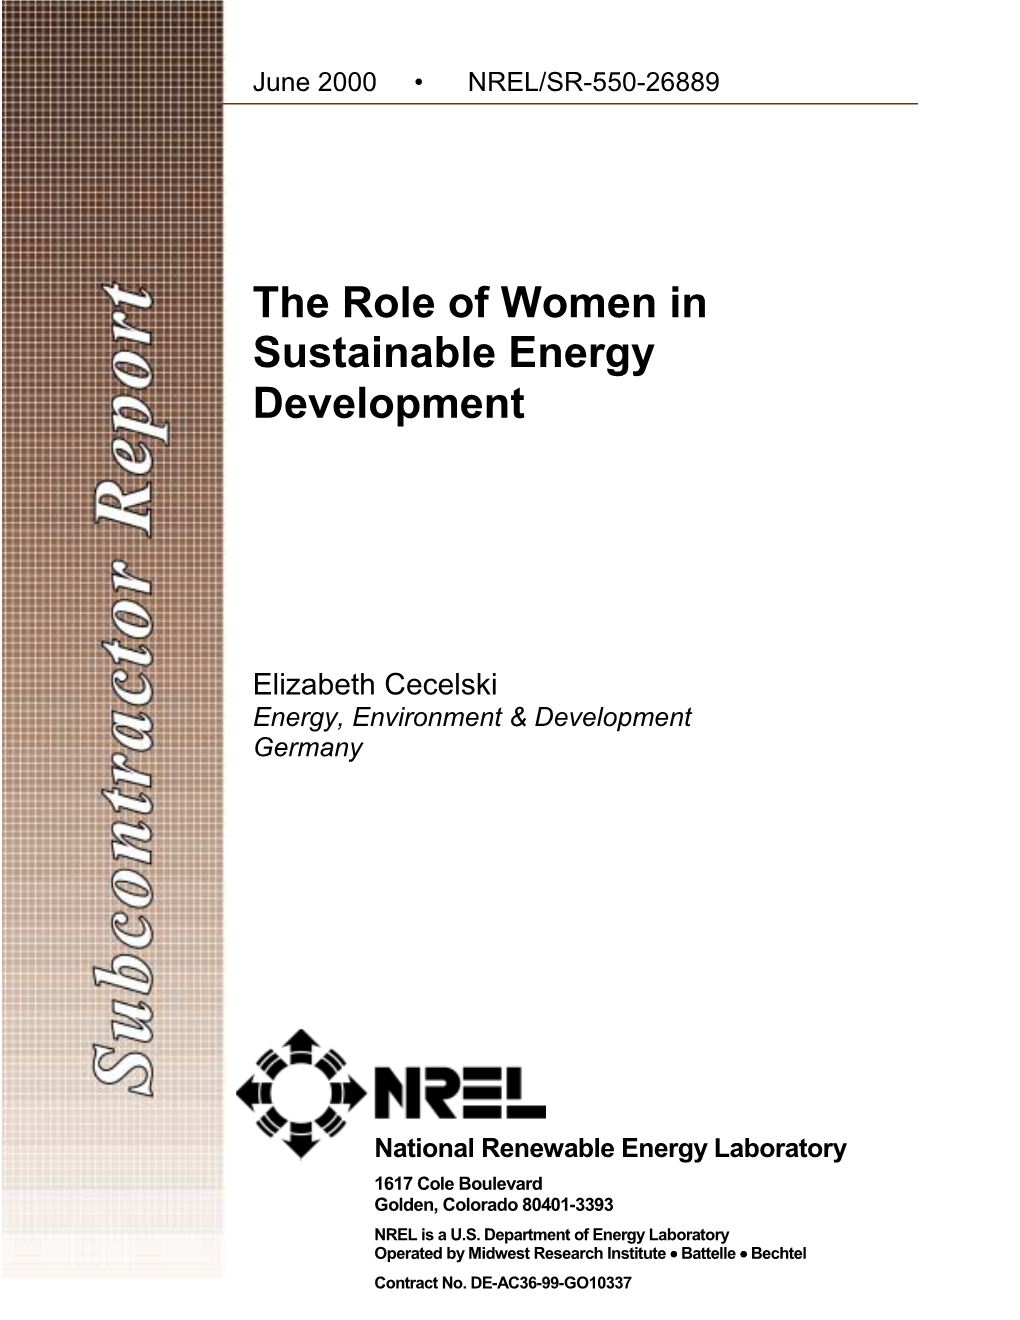 The Role of Women in Sustainable Energy Development